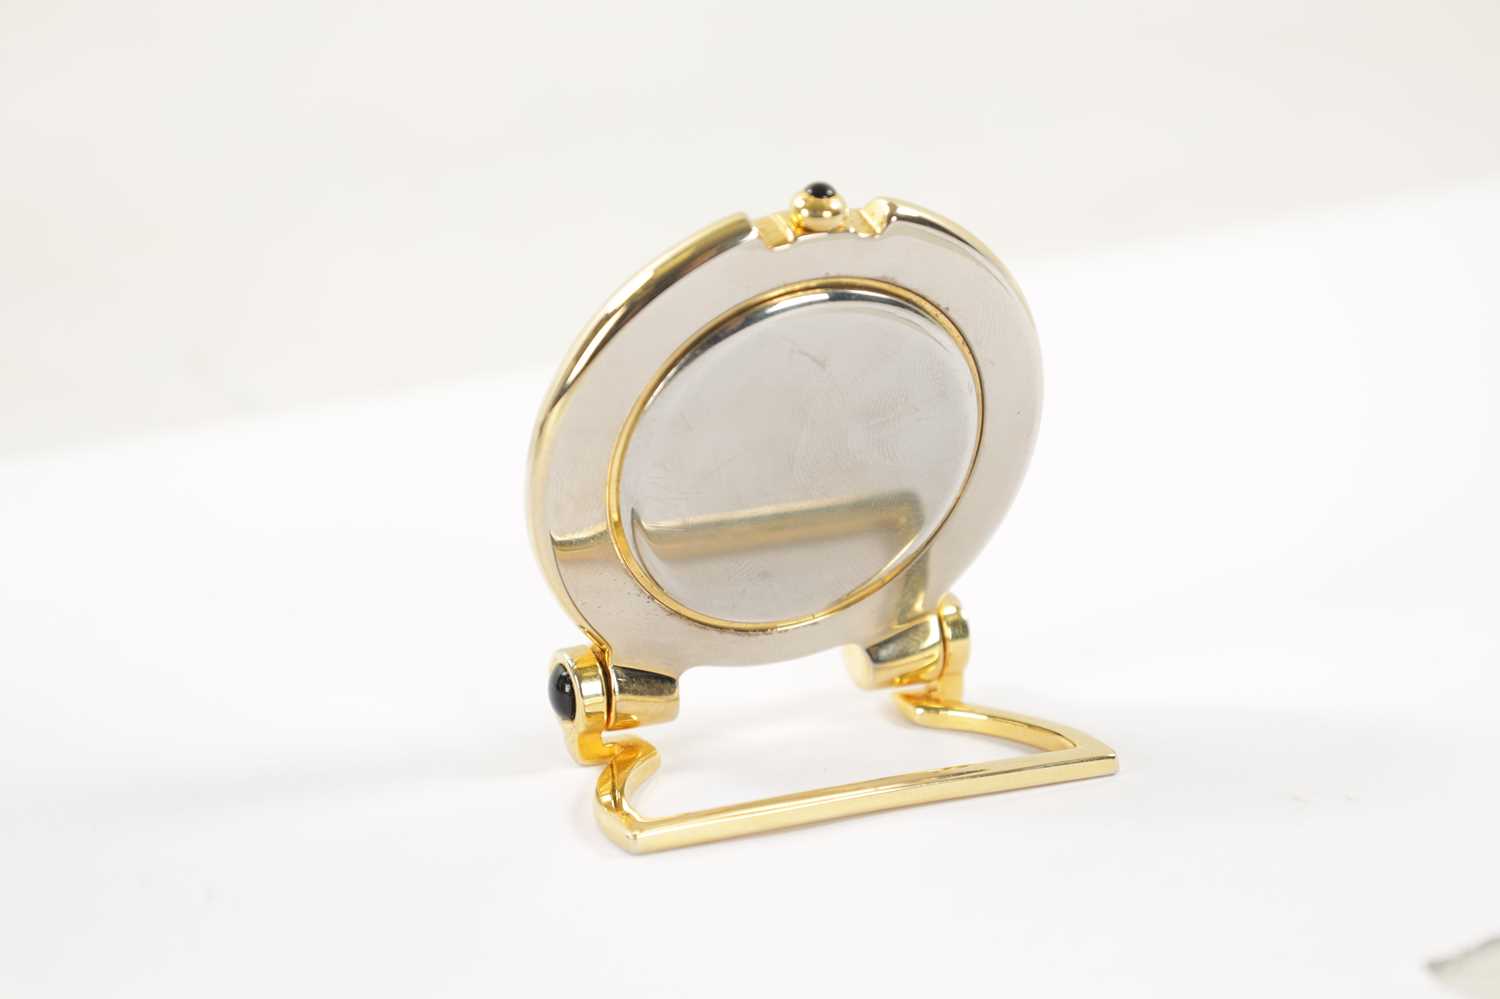 A VINTAGE MINIATURE GOLD PLATED CARTIER DESK CLOCK - Image 4 of 4